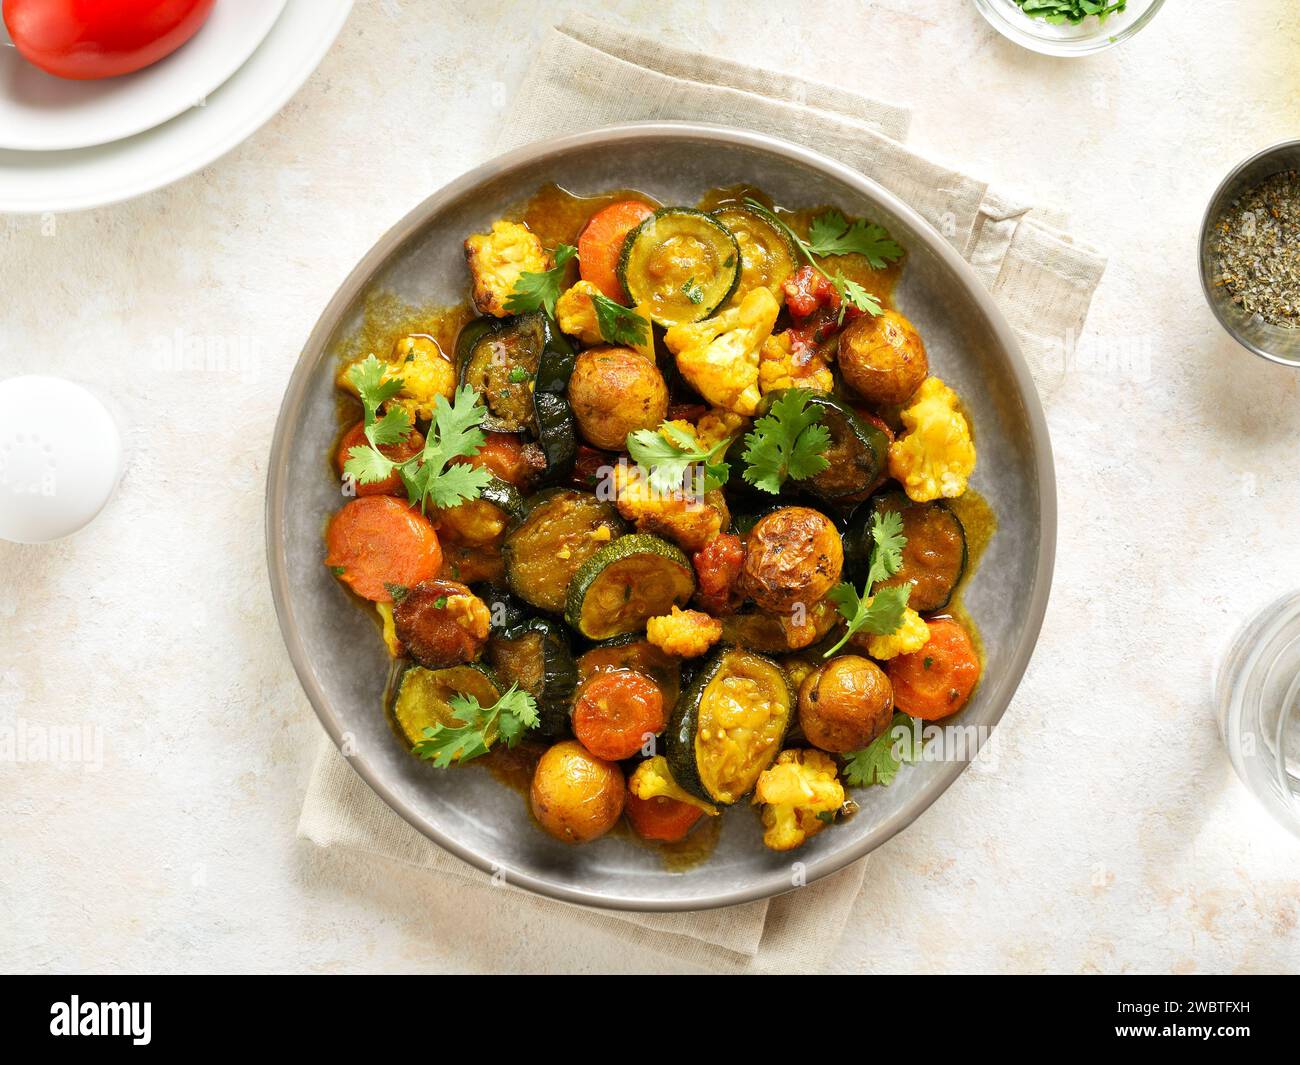 Vegetarian stew with mixed vegetables on plate over light background. Colorful mix of seasonal vegetables for comfort eating. Top view, flat lay Stock Photo